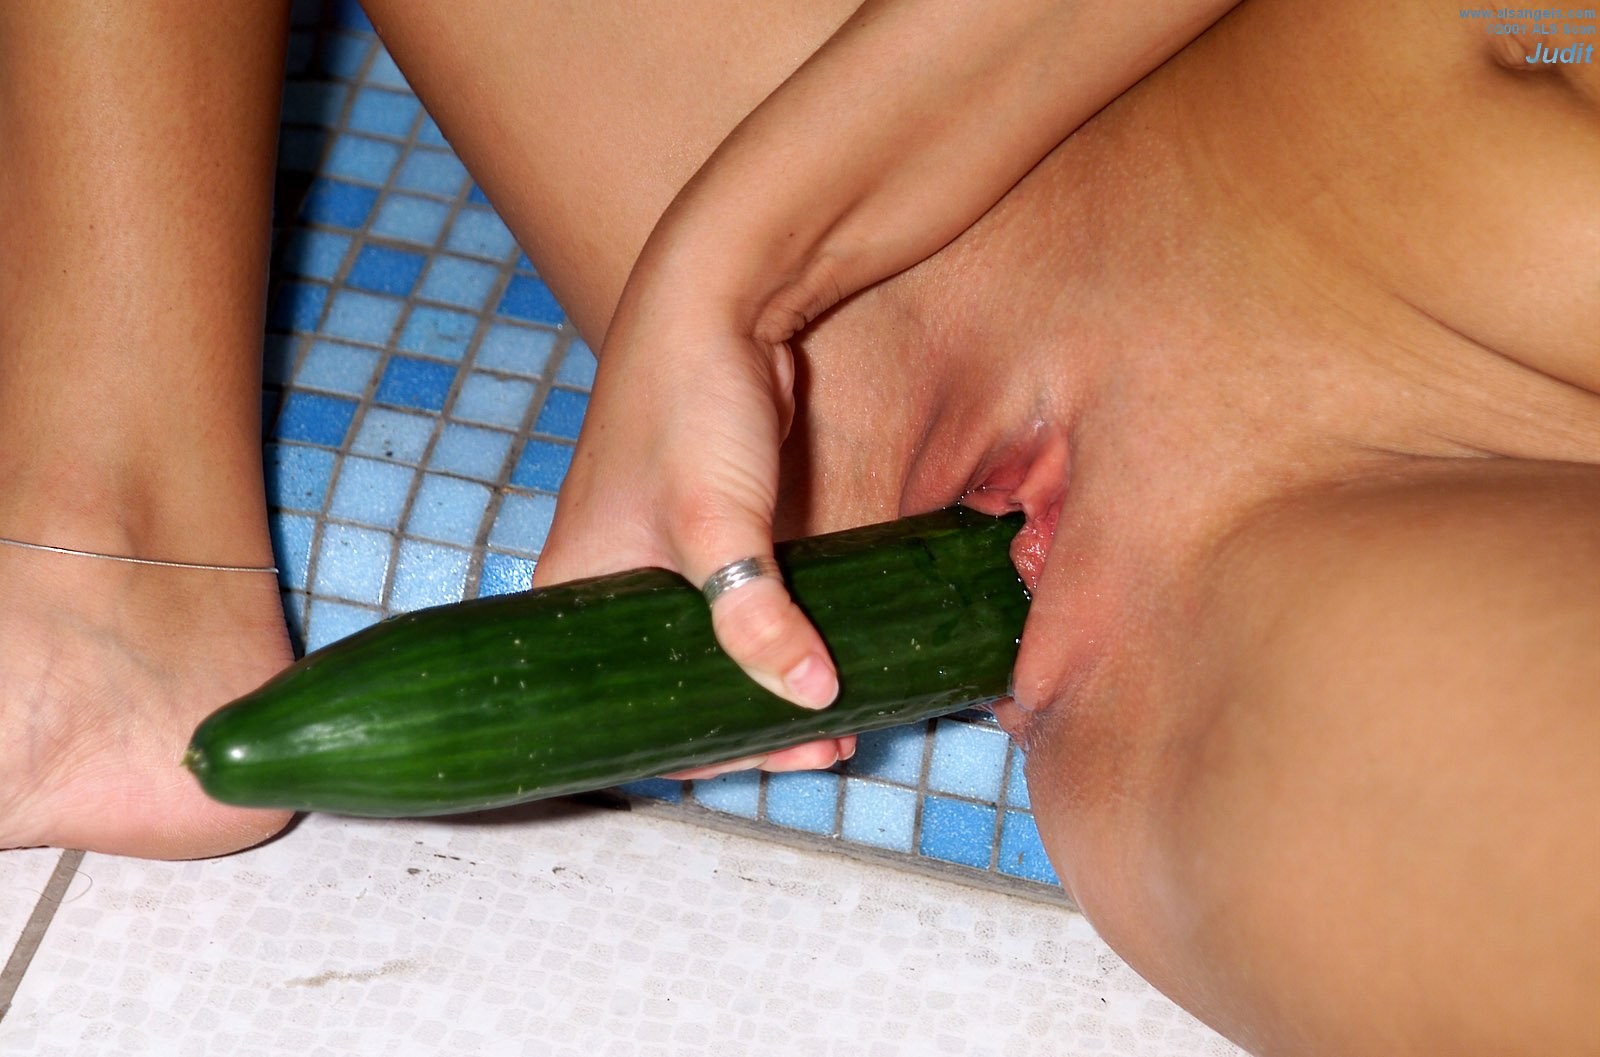 Indian housewife masturbating with cucumber